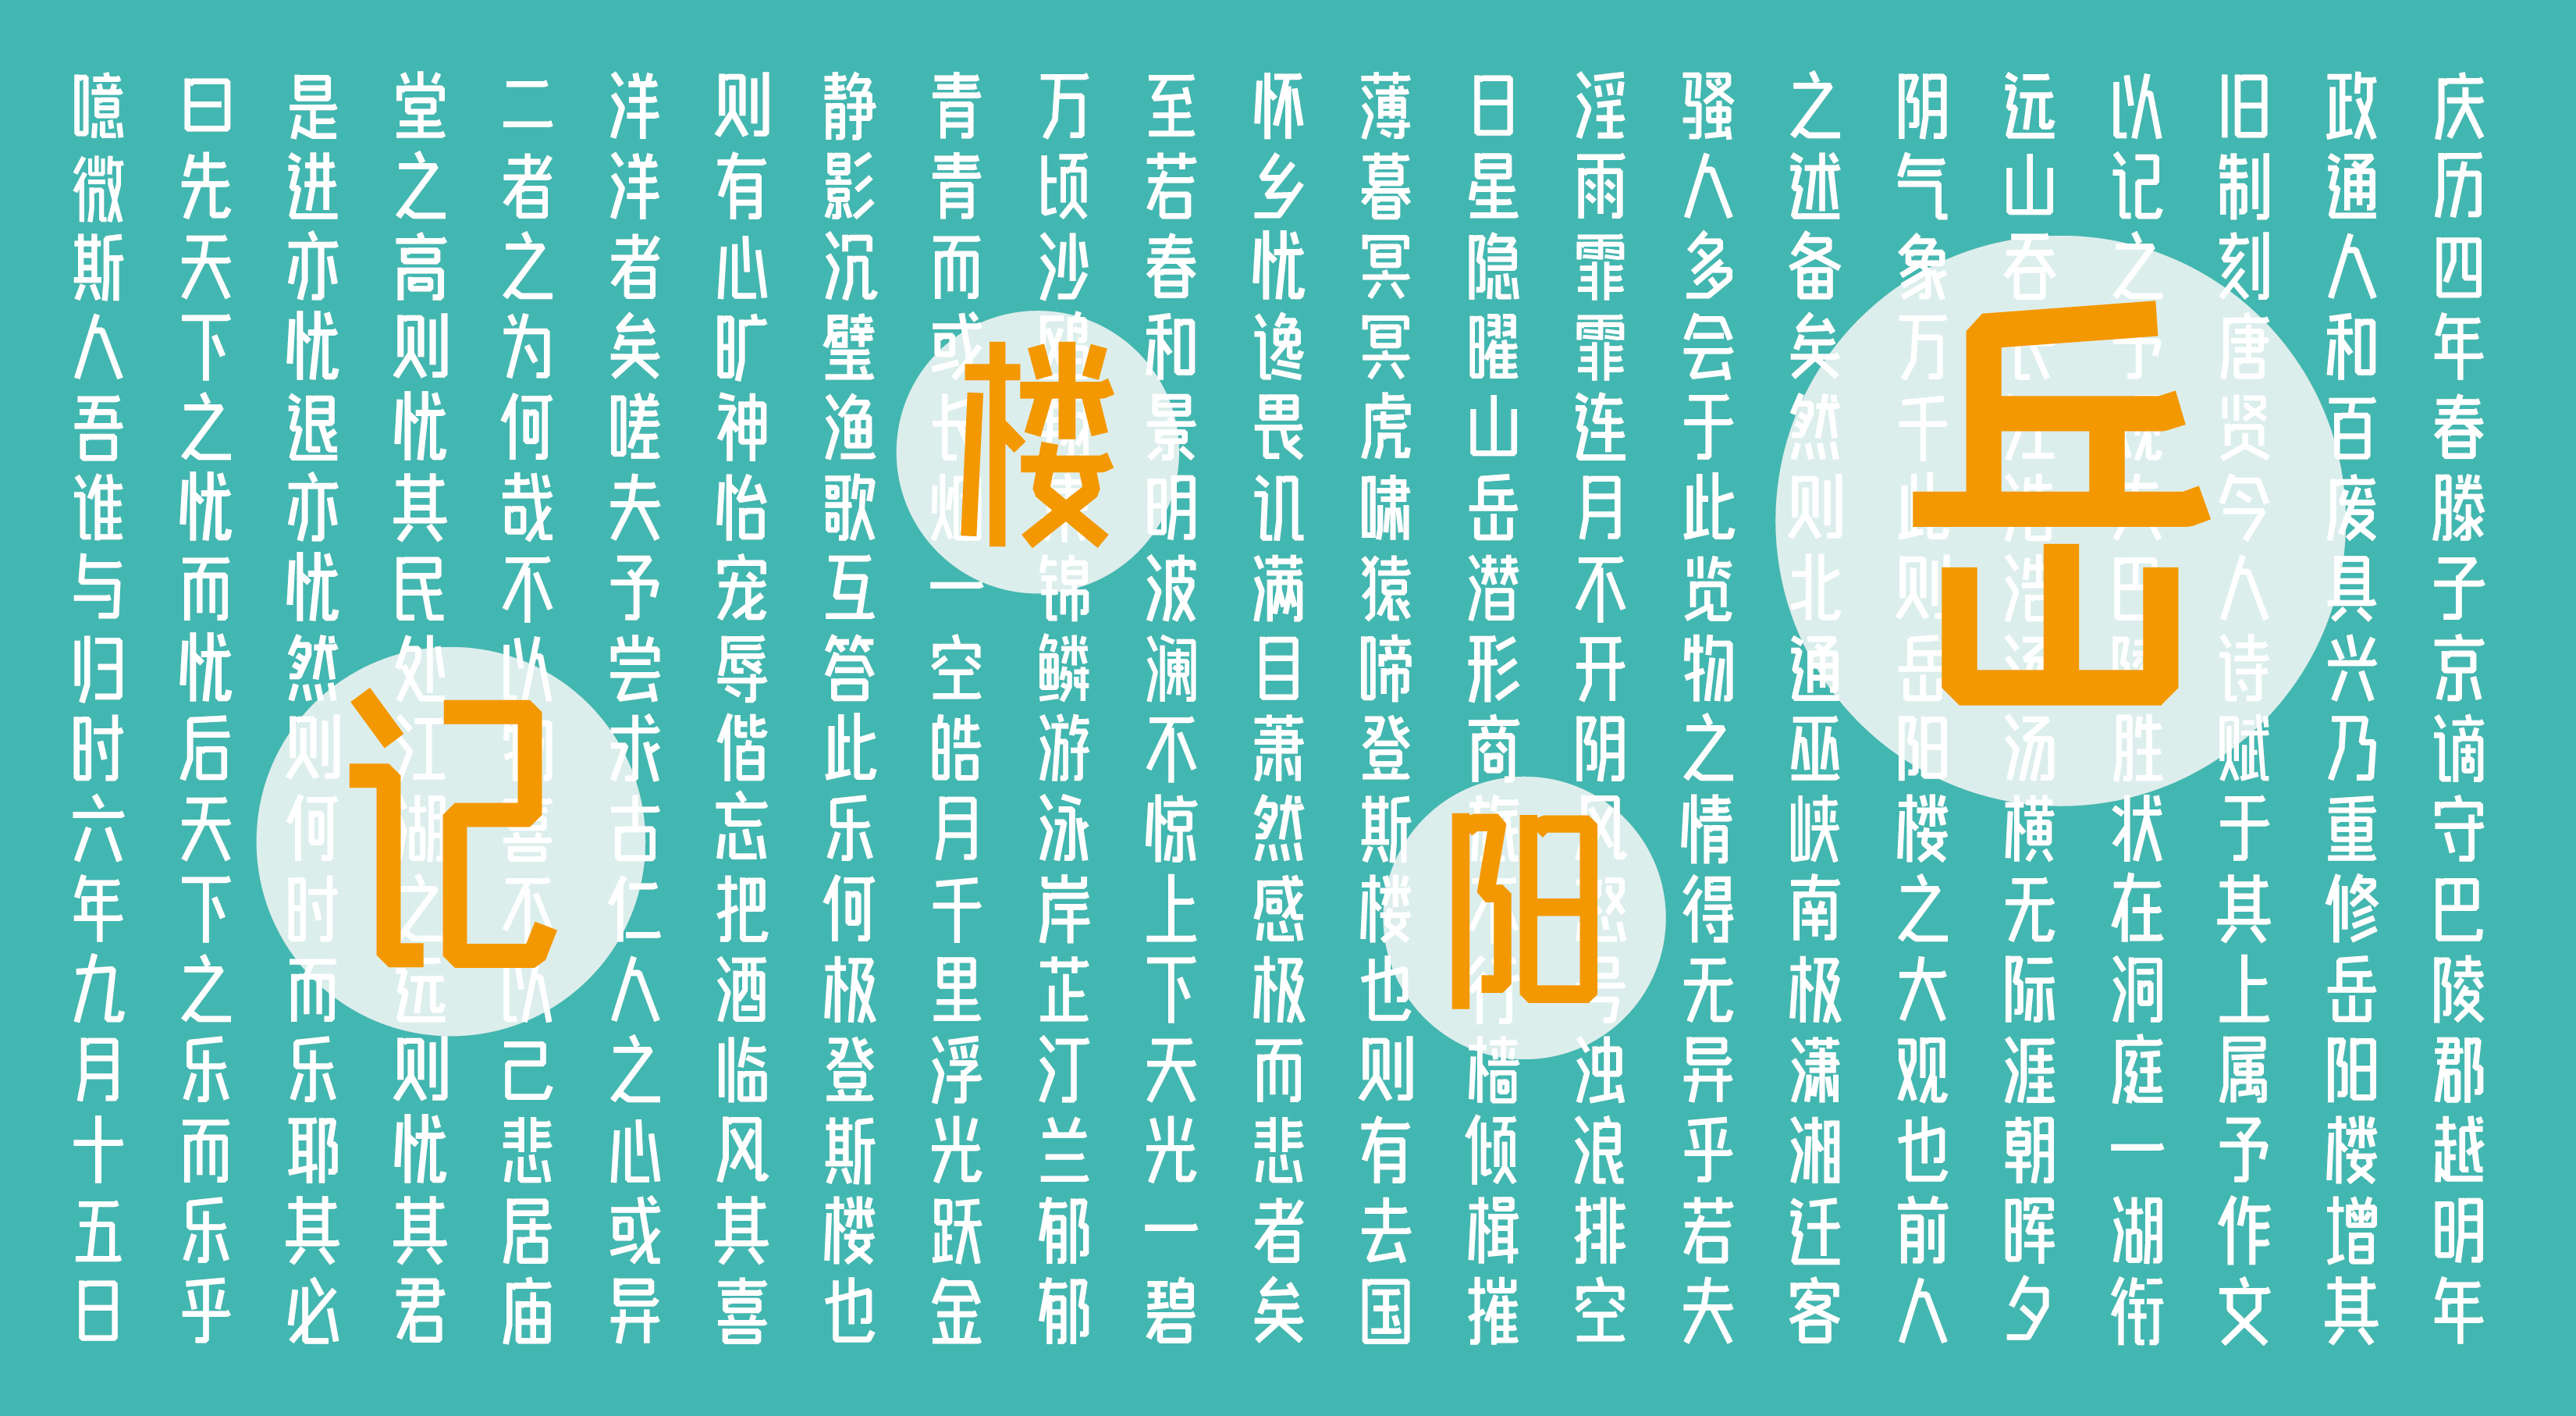 9P Chinese font design collection inspiration #.82